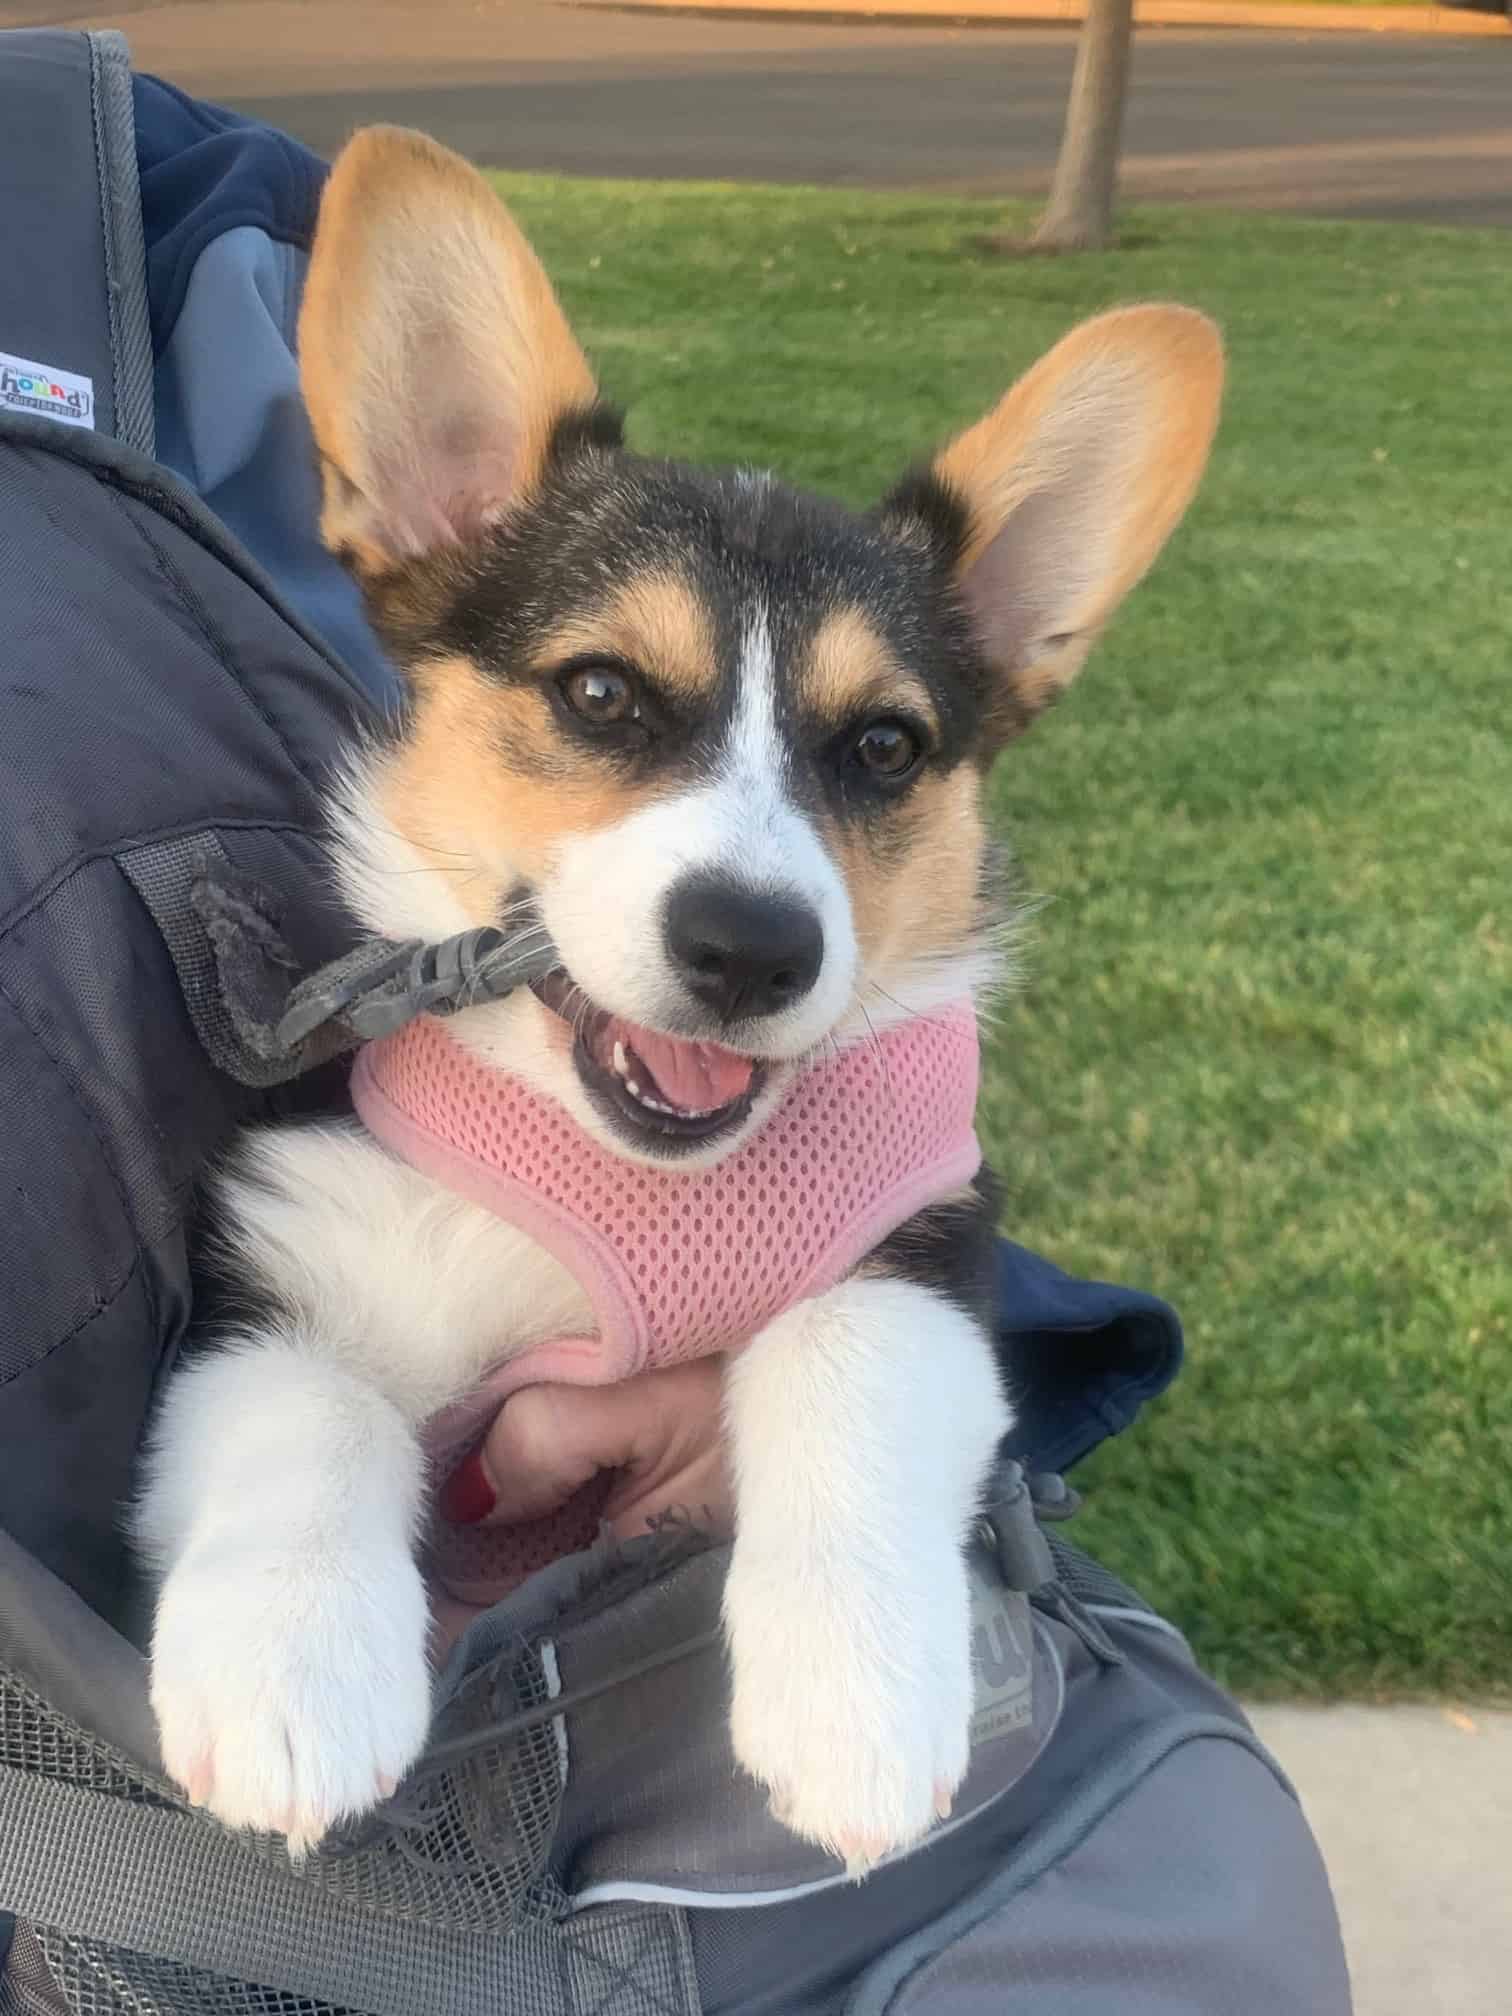 Nutmeg a Pembroke Welsh Corgi puppy gets carried during a walk. Puppies create or develop their personalities during the first 16 weeks. Introduce puppies to new situations, people, and car rides. Socialization helps make puppies into confident adult dogs.